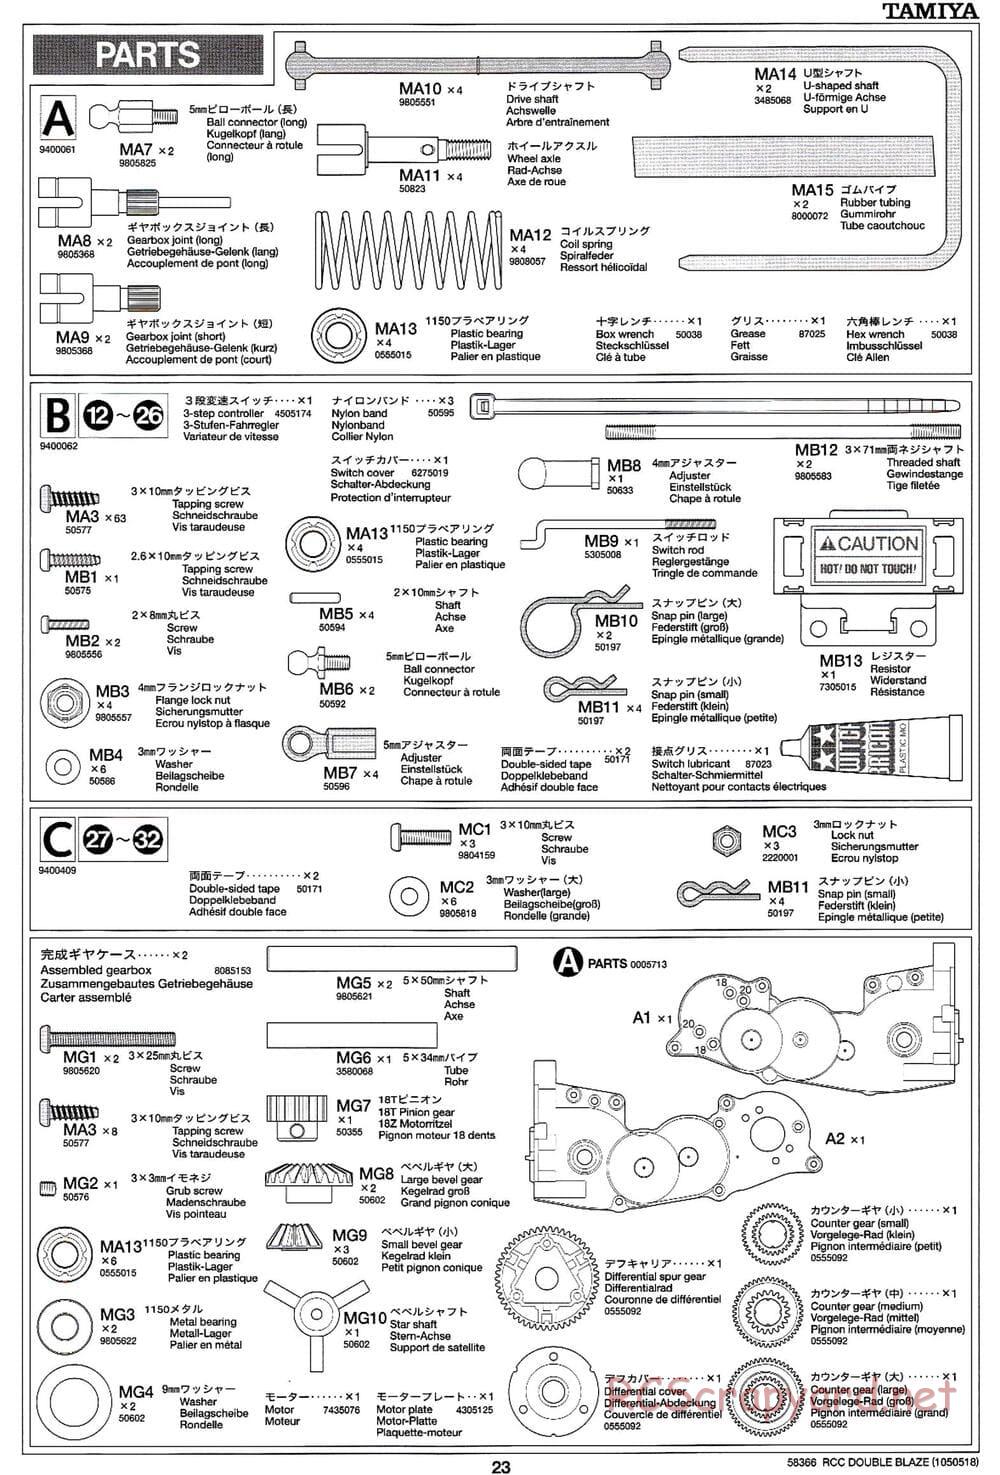 Tamiya - Double Blaze - WR-01 Chassis - Manual - Page 23